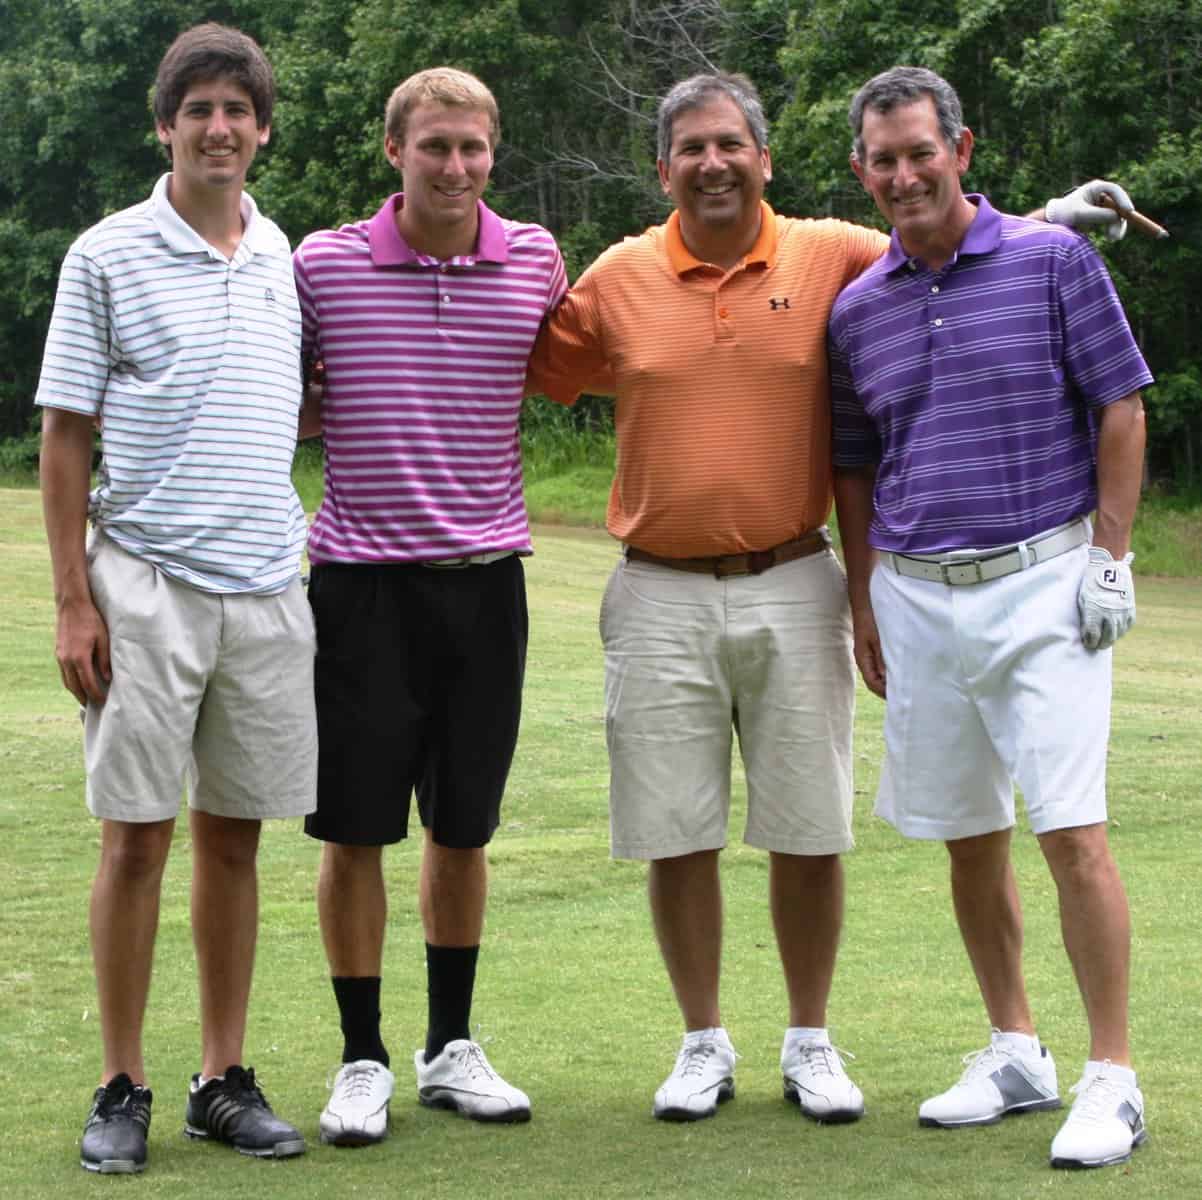 Winning Foursome: Ben Leon, Wes Bourdon, Miles Leon, and Nathan Jaffe.